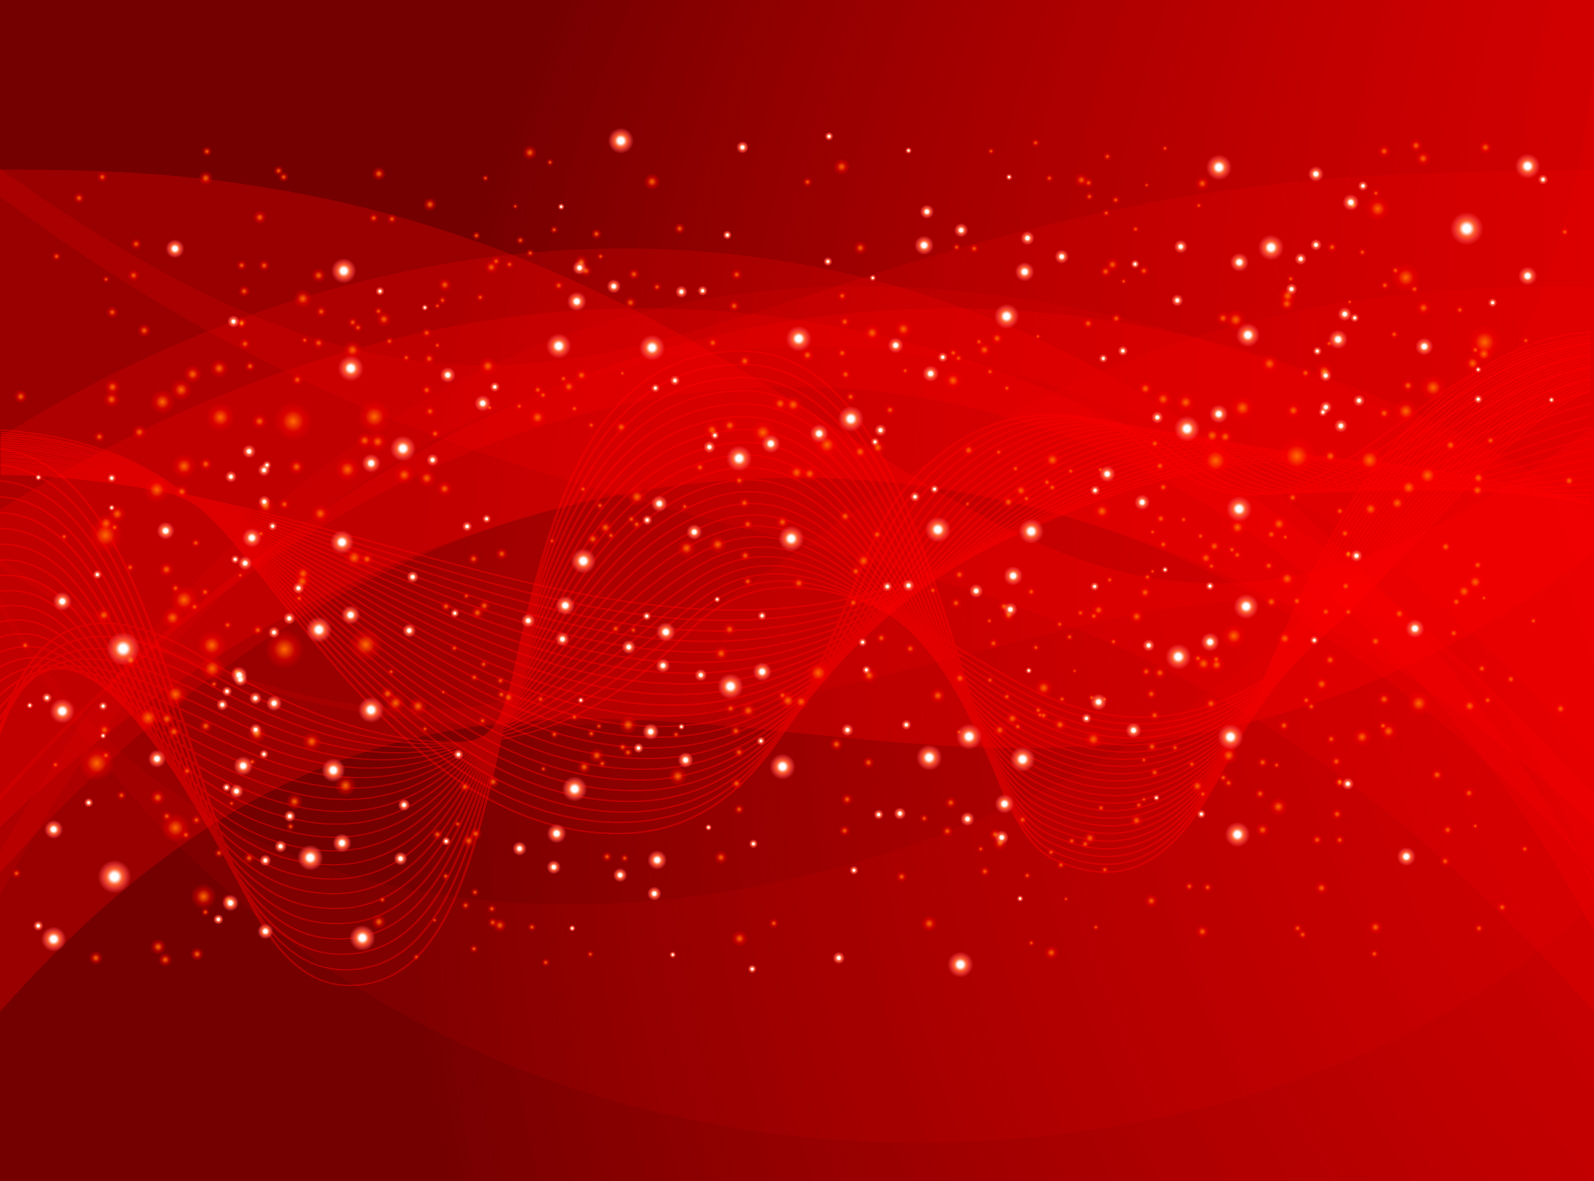 Download 21 background-merah Abstract-red-page-background-Public-domain-vectors.jpg